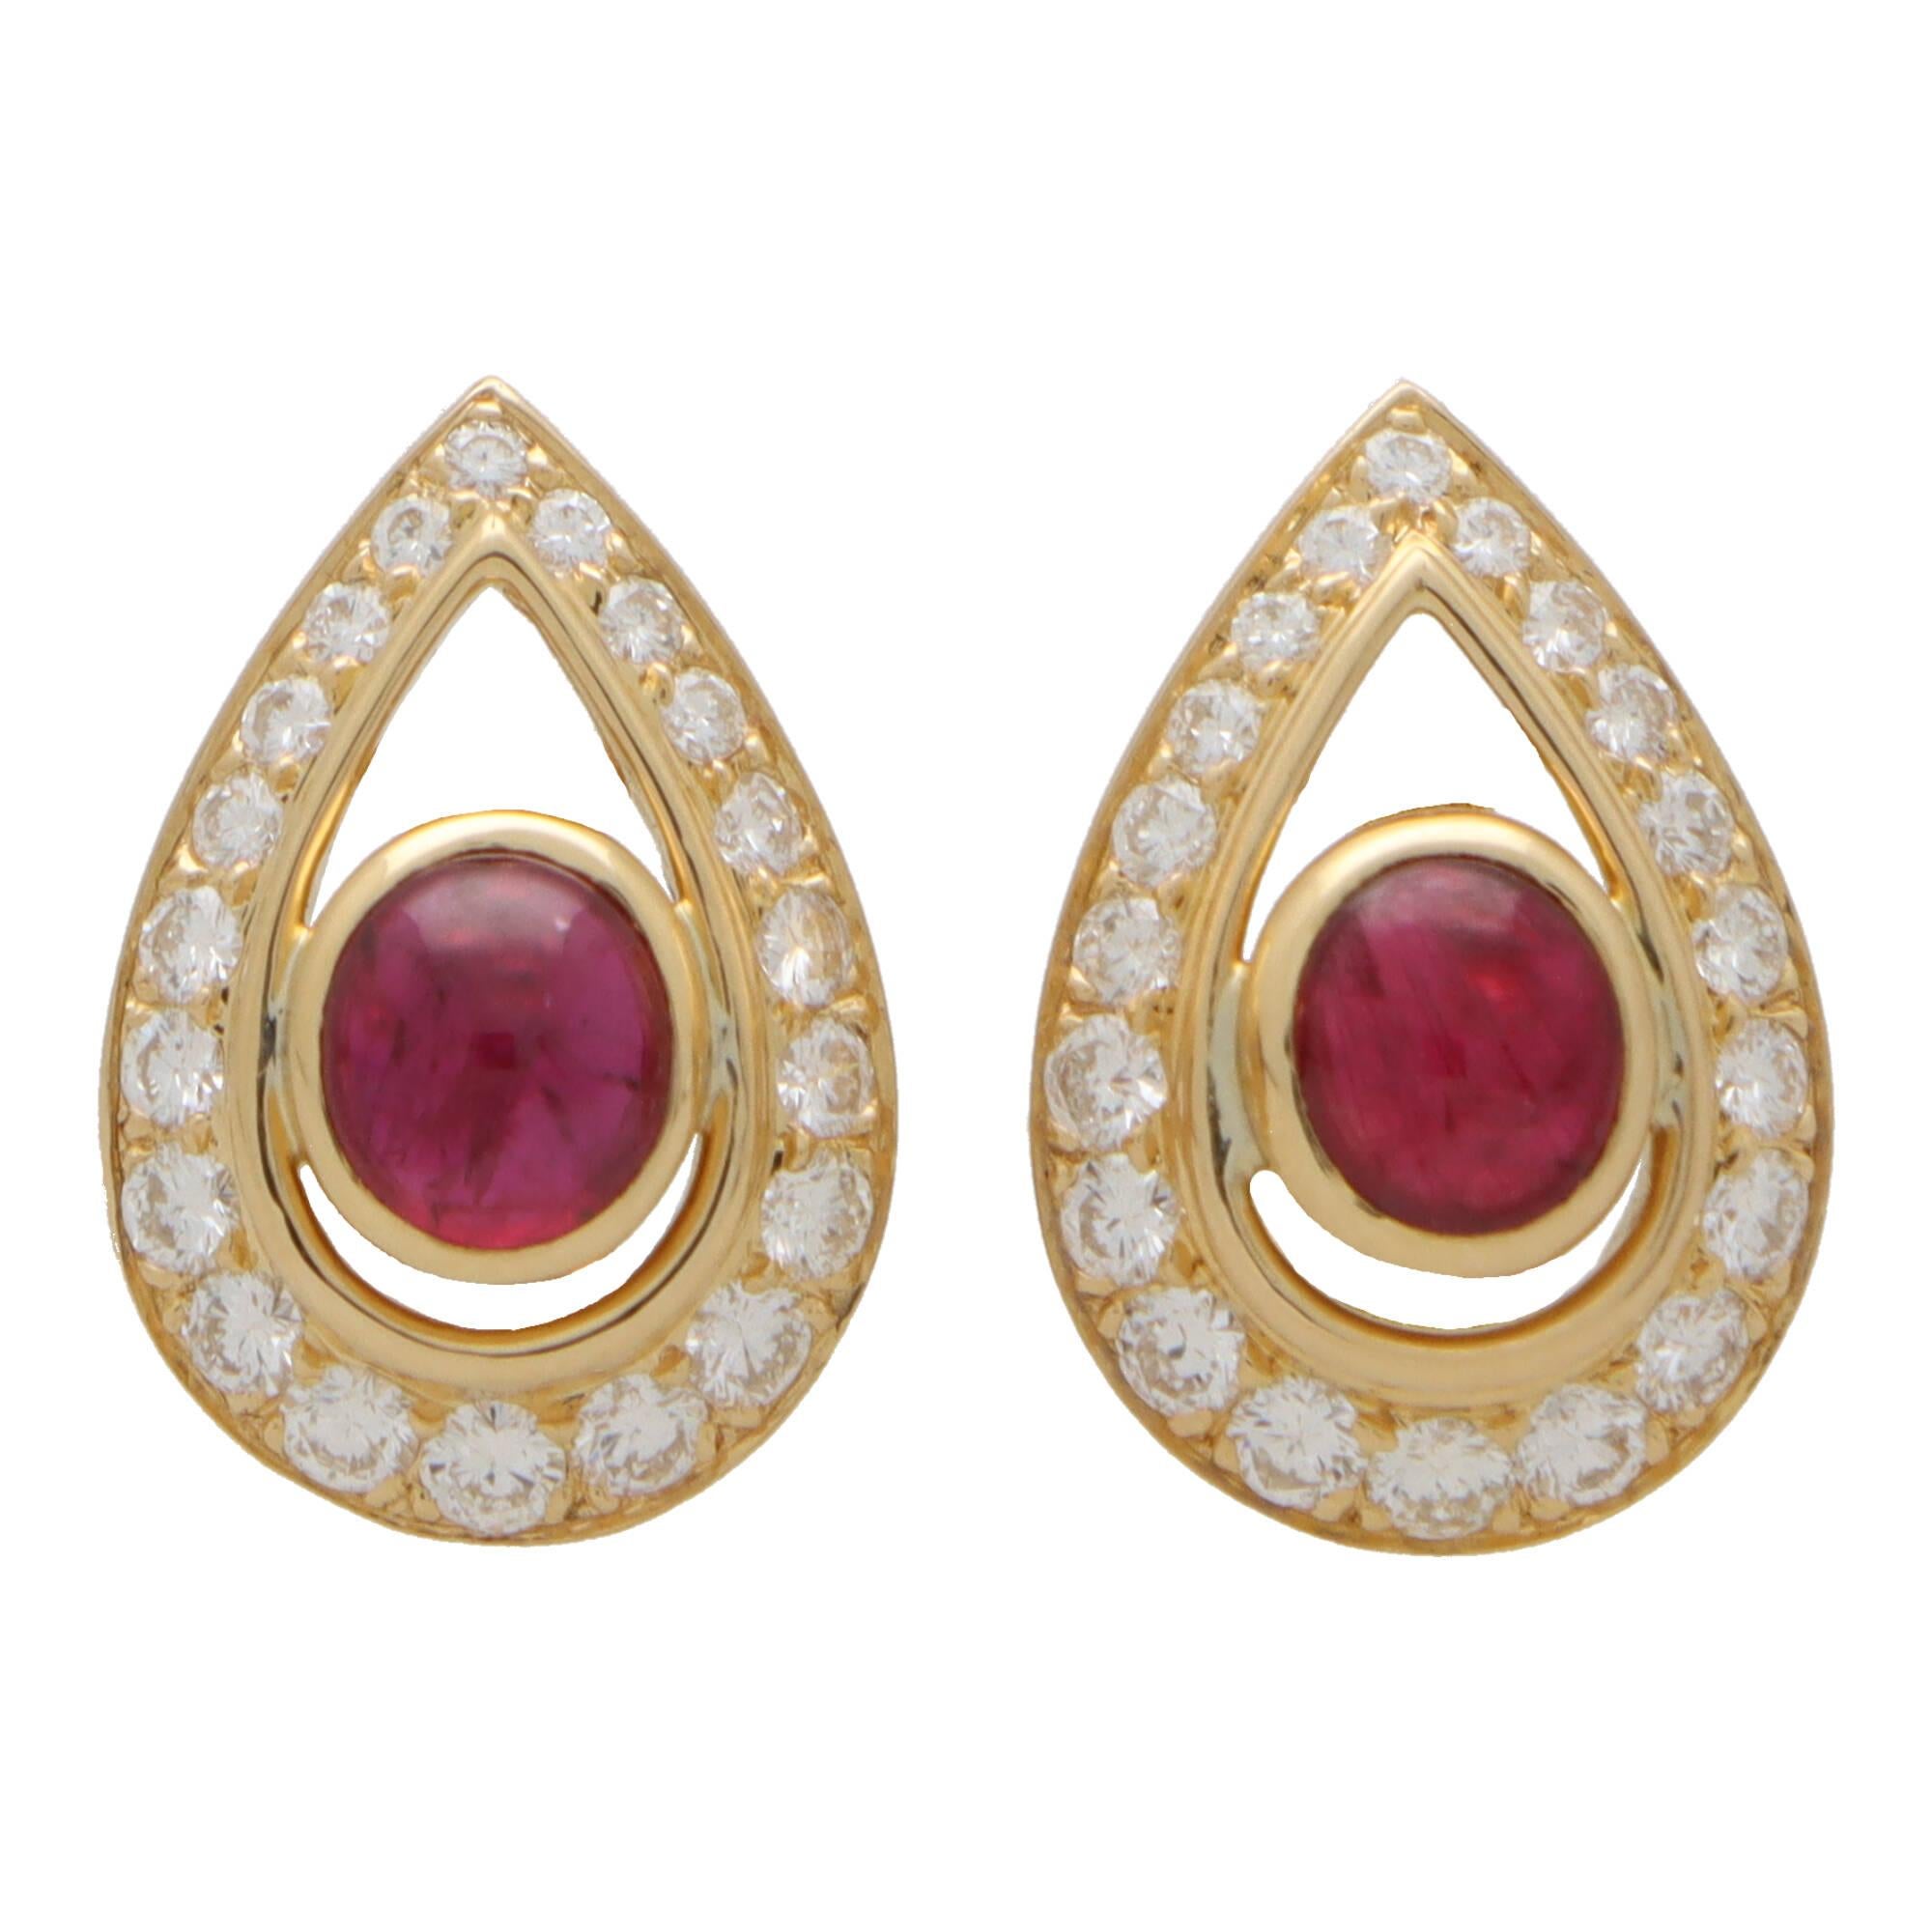 Vintage Cartier Cabochon Ruby and Diamond Earrings